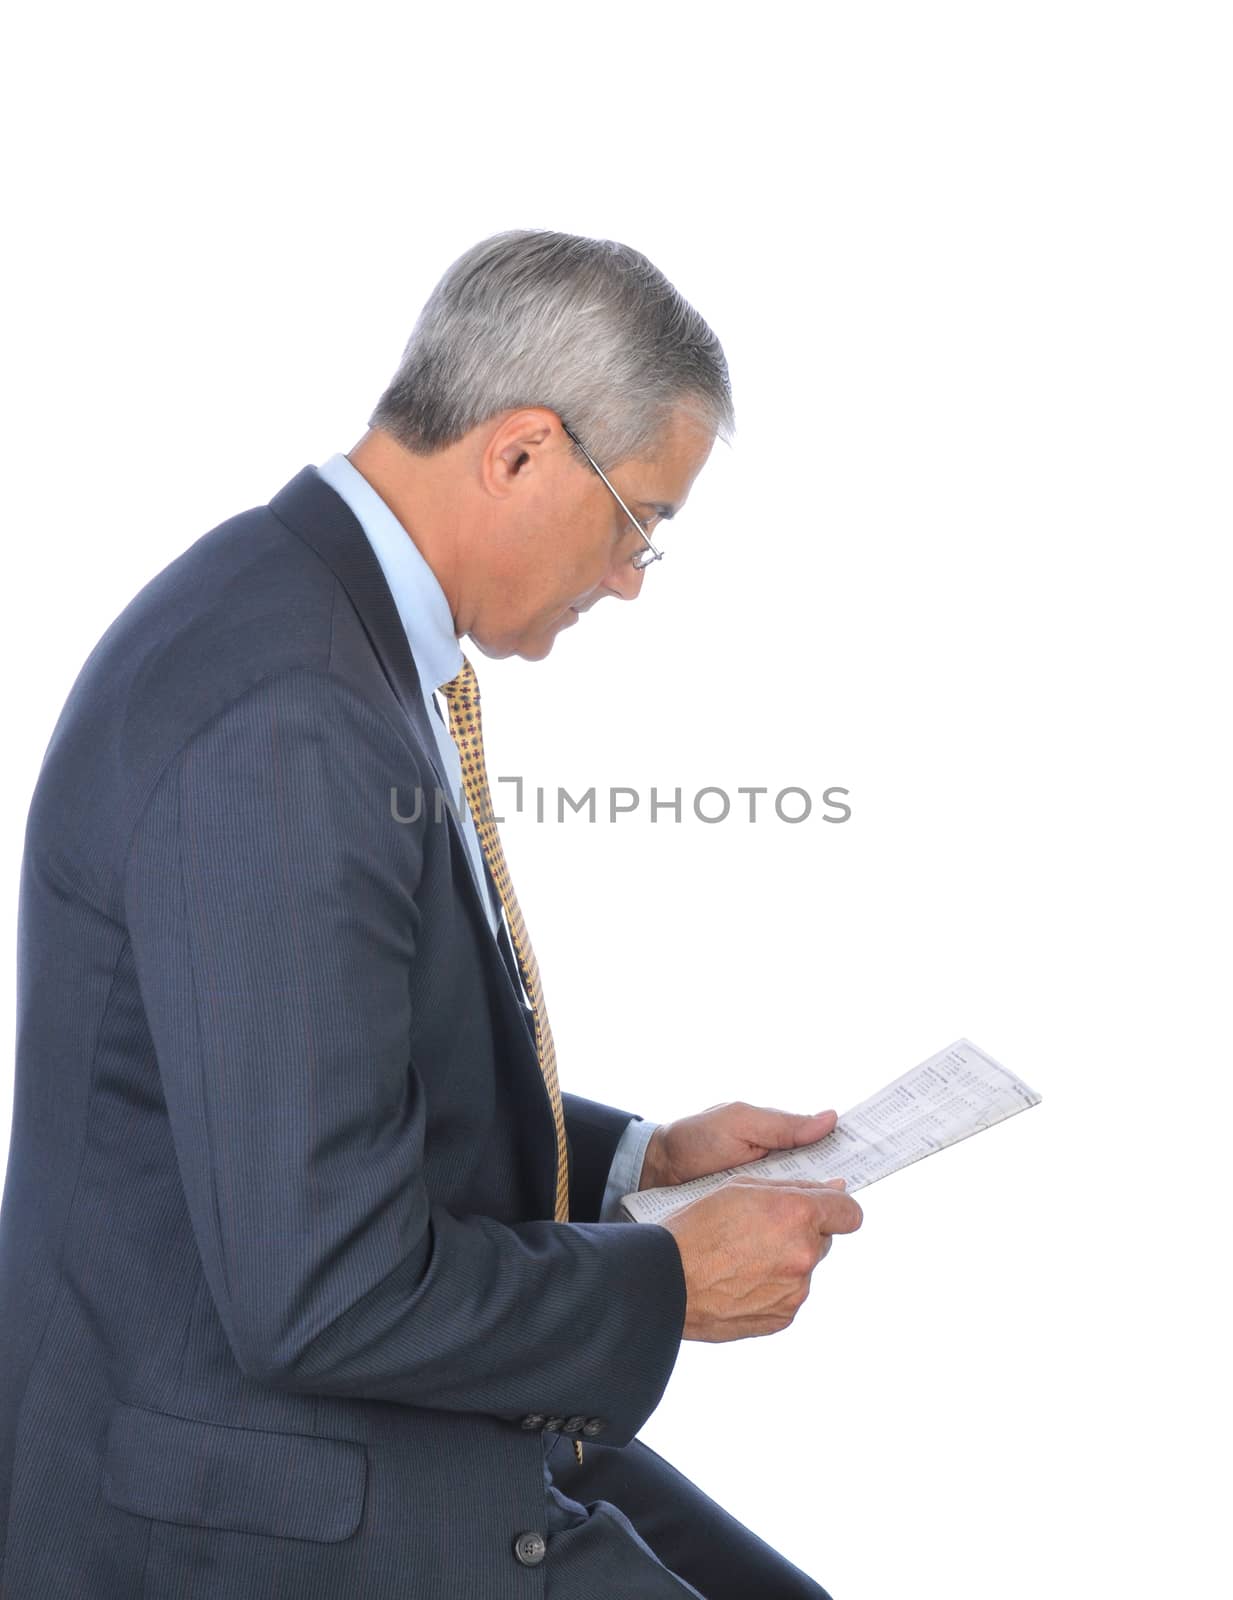 Profile of a Middle Aged Businessman Reading the financial section of a Newspaper. Vertical format isolated on white.